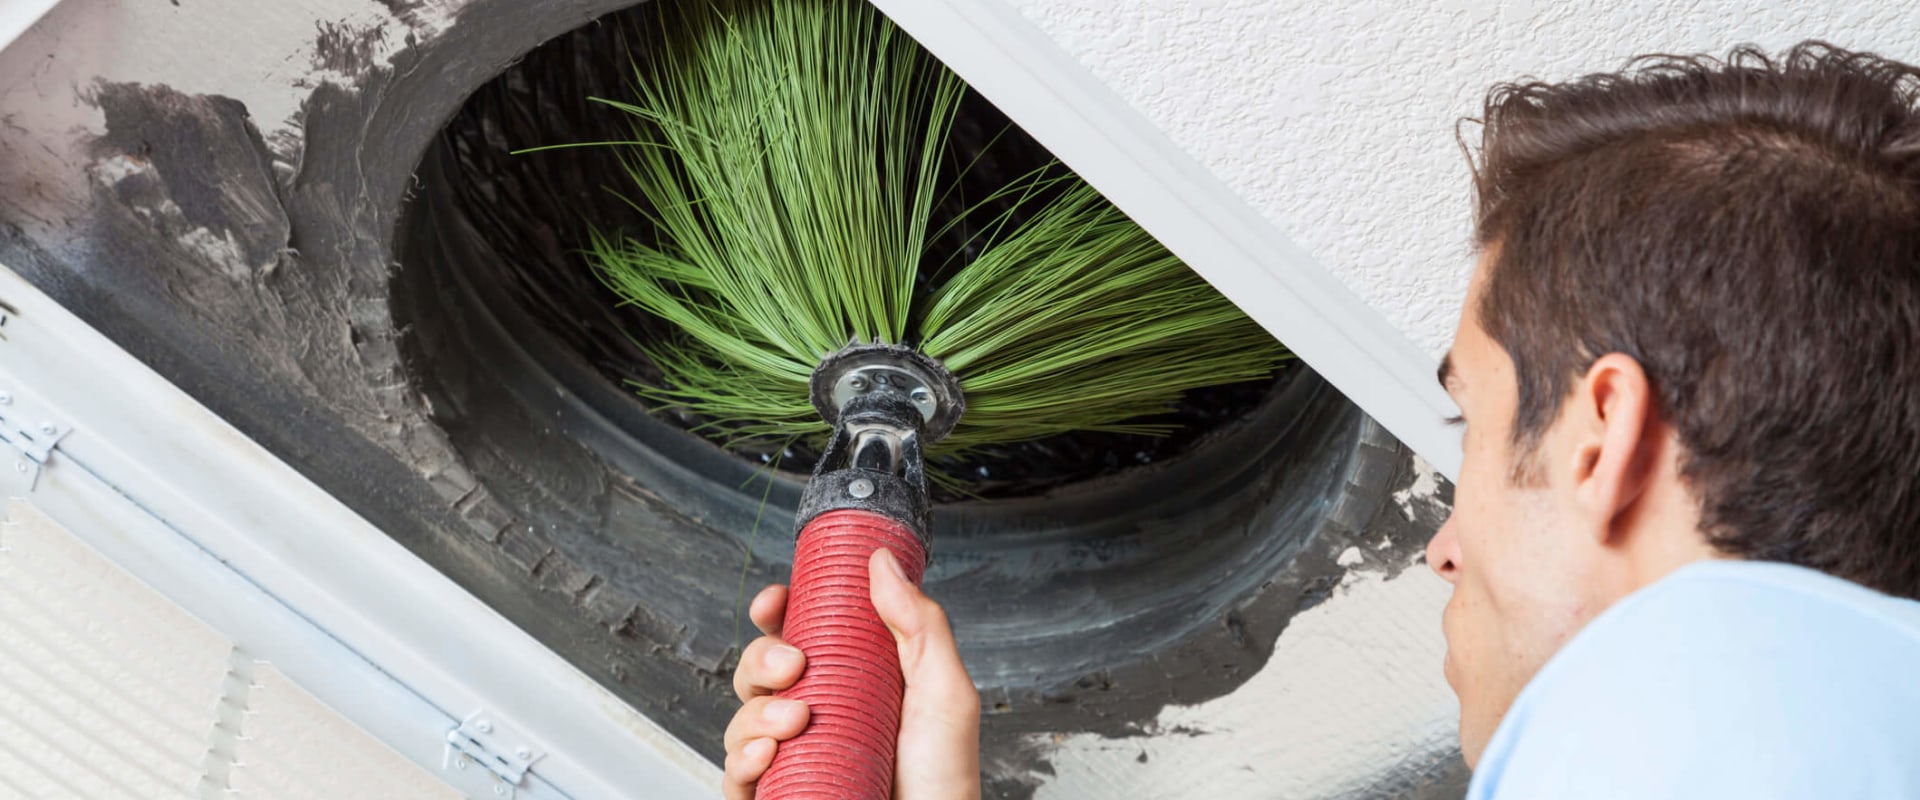 How Often Should You Clean the Ducts of an Installed HVAC System in West Palm Beach, FL?